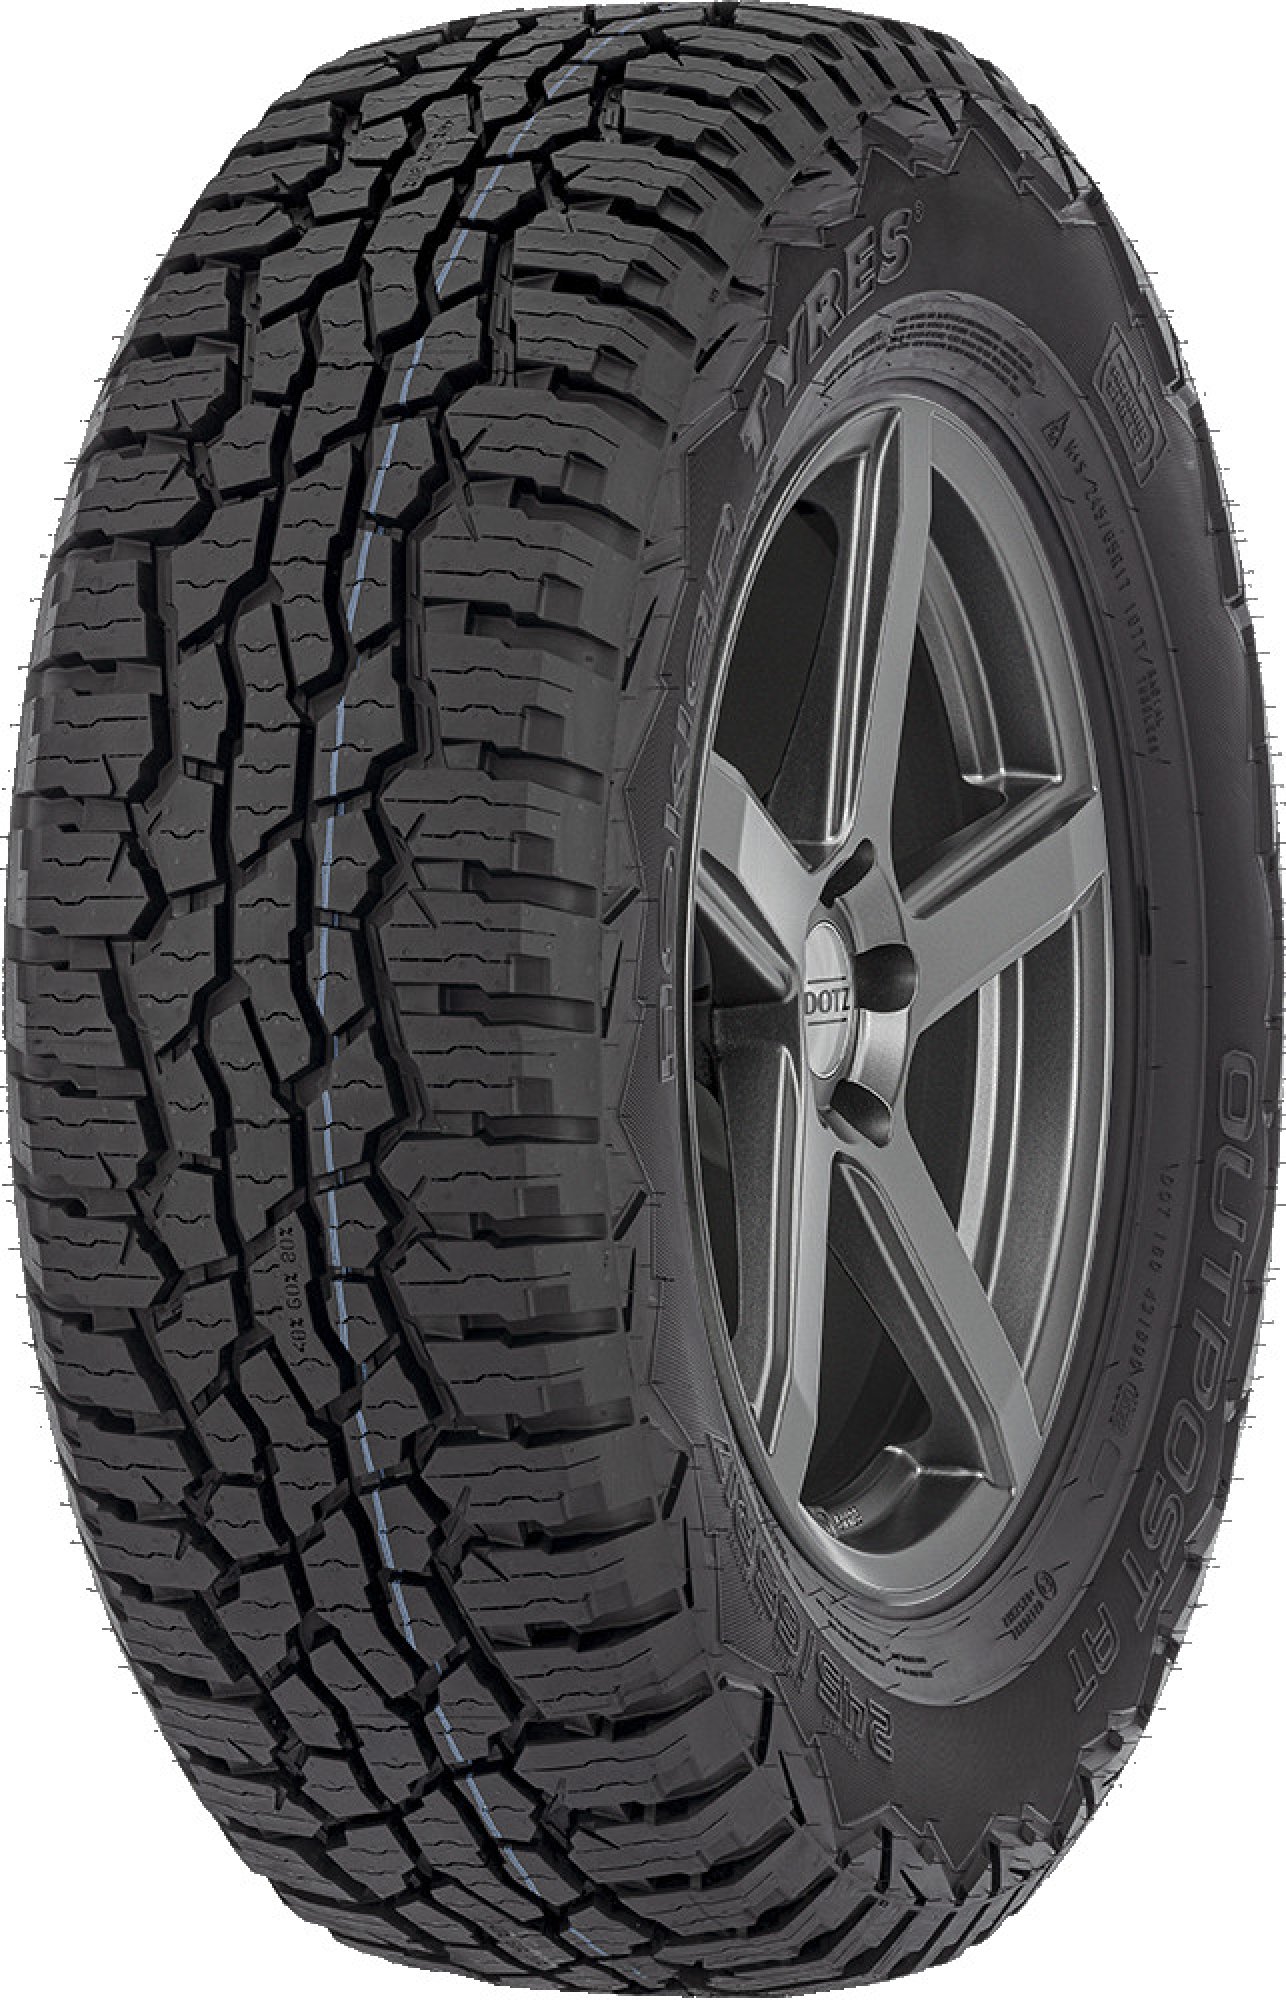 NOKIAN TYRES OUTPOST AT 275/70 R 17 121/118S